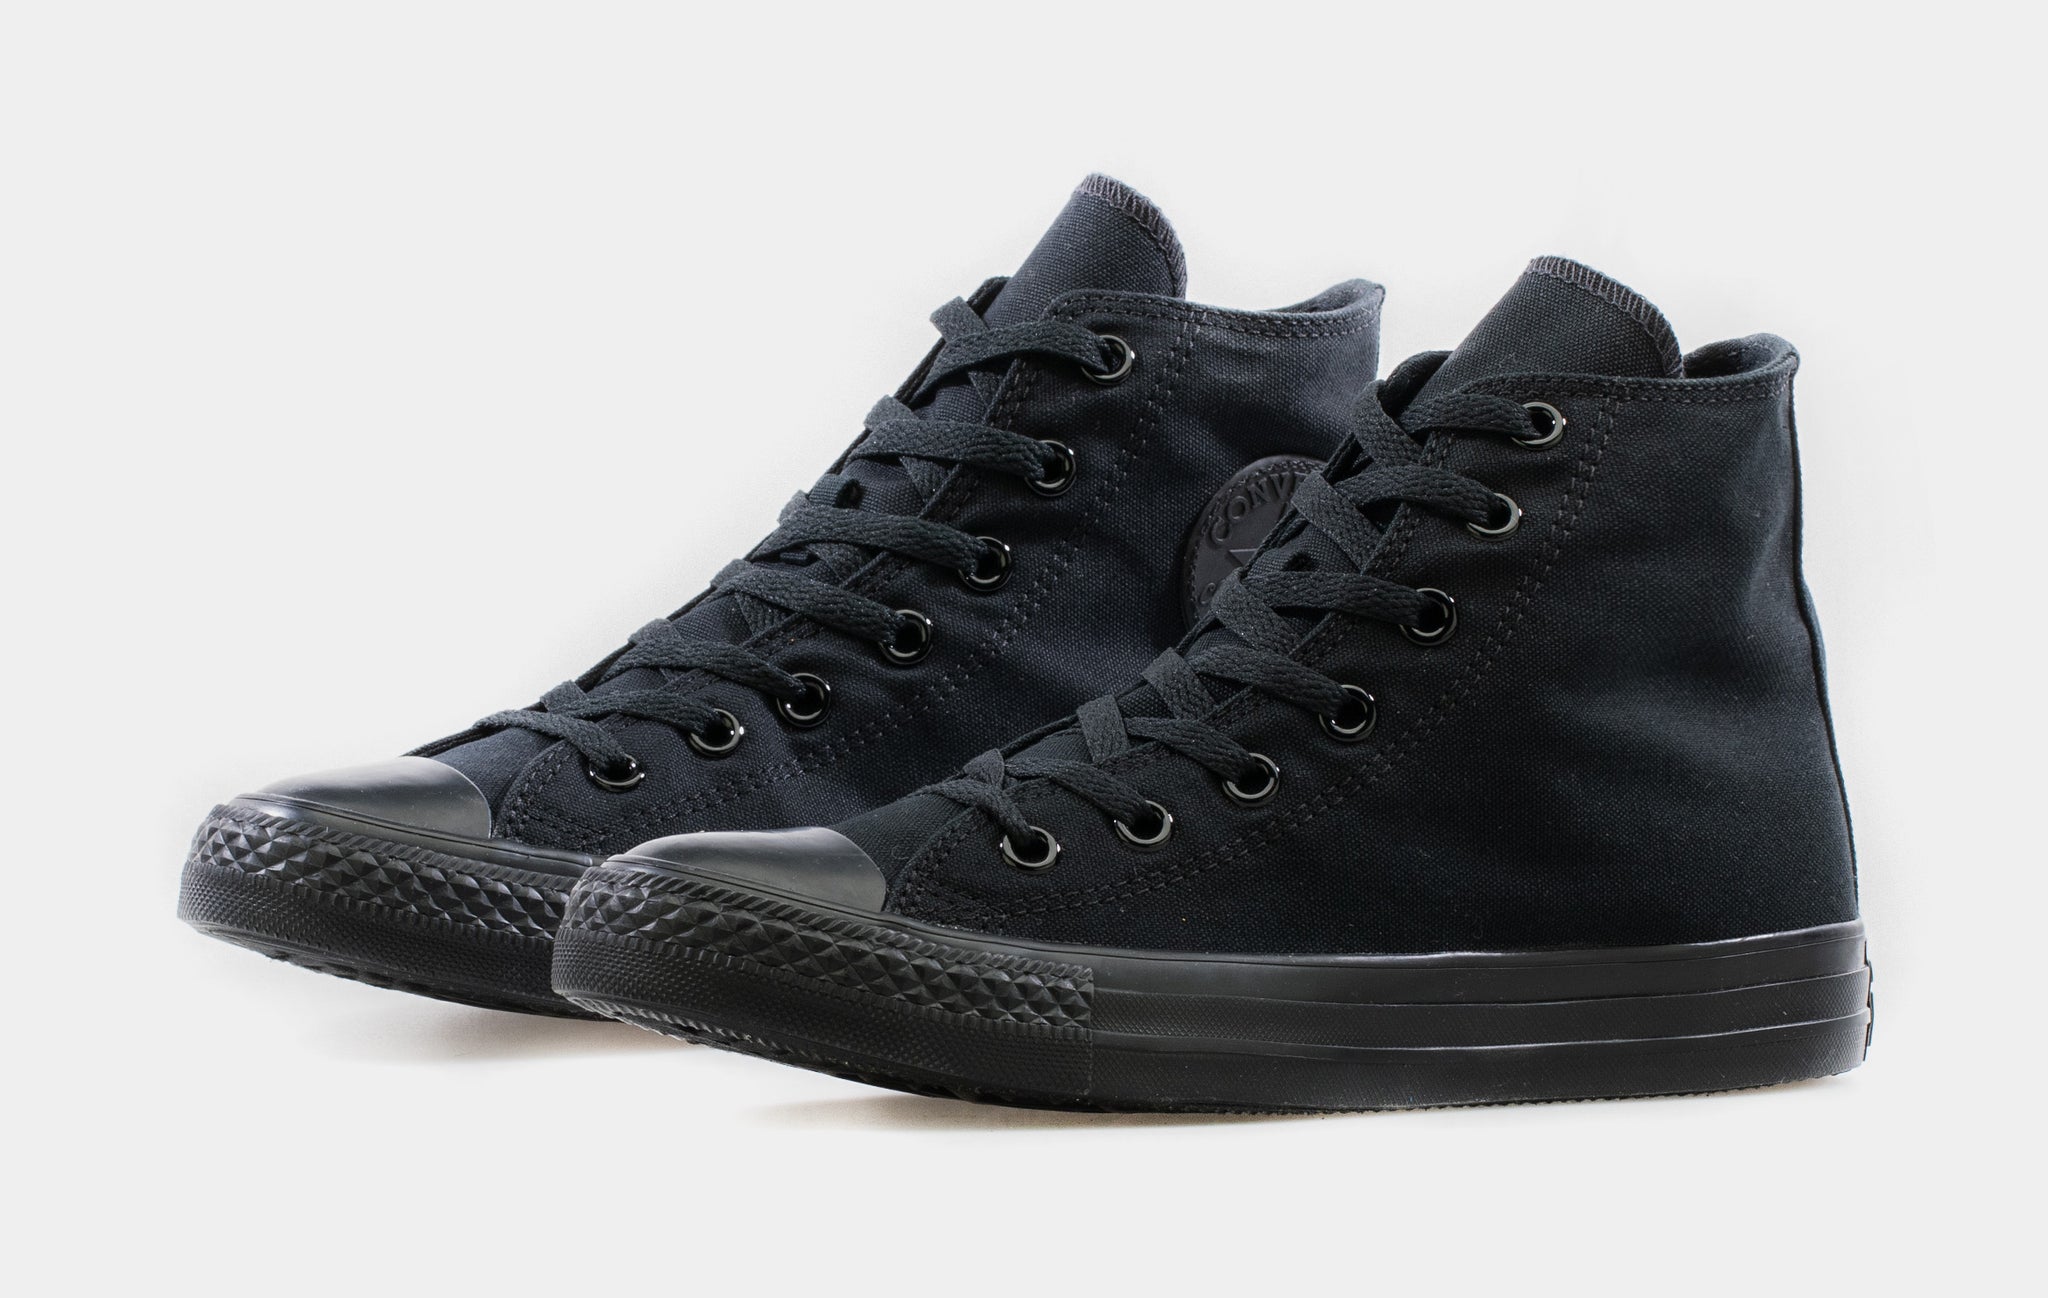 Converse Women's Chuck Taylor High Top Casual Shoes in Black/Black Size 10.0 | Canvas